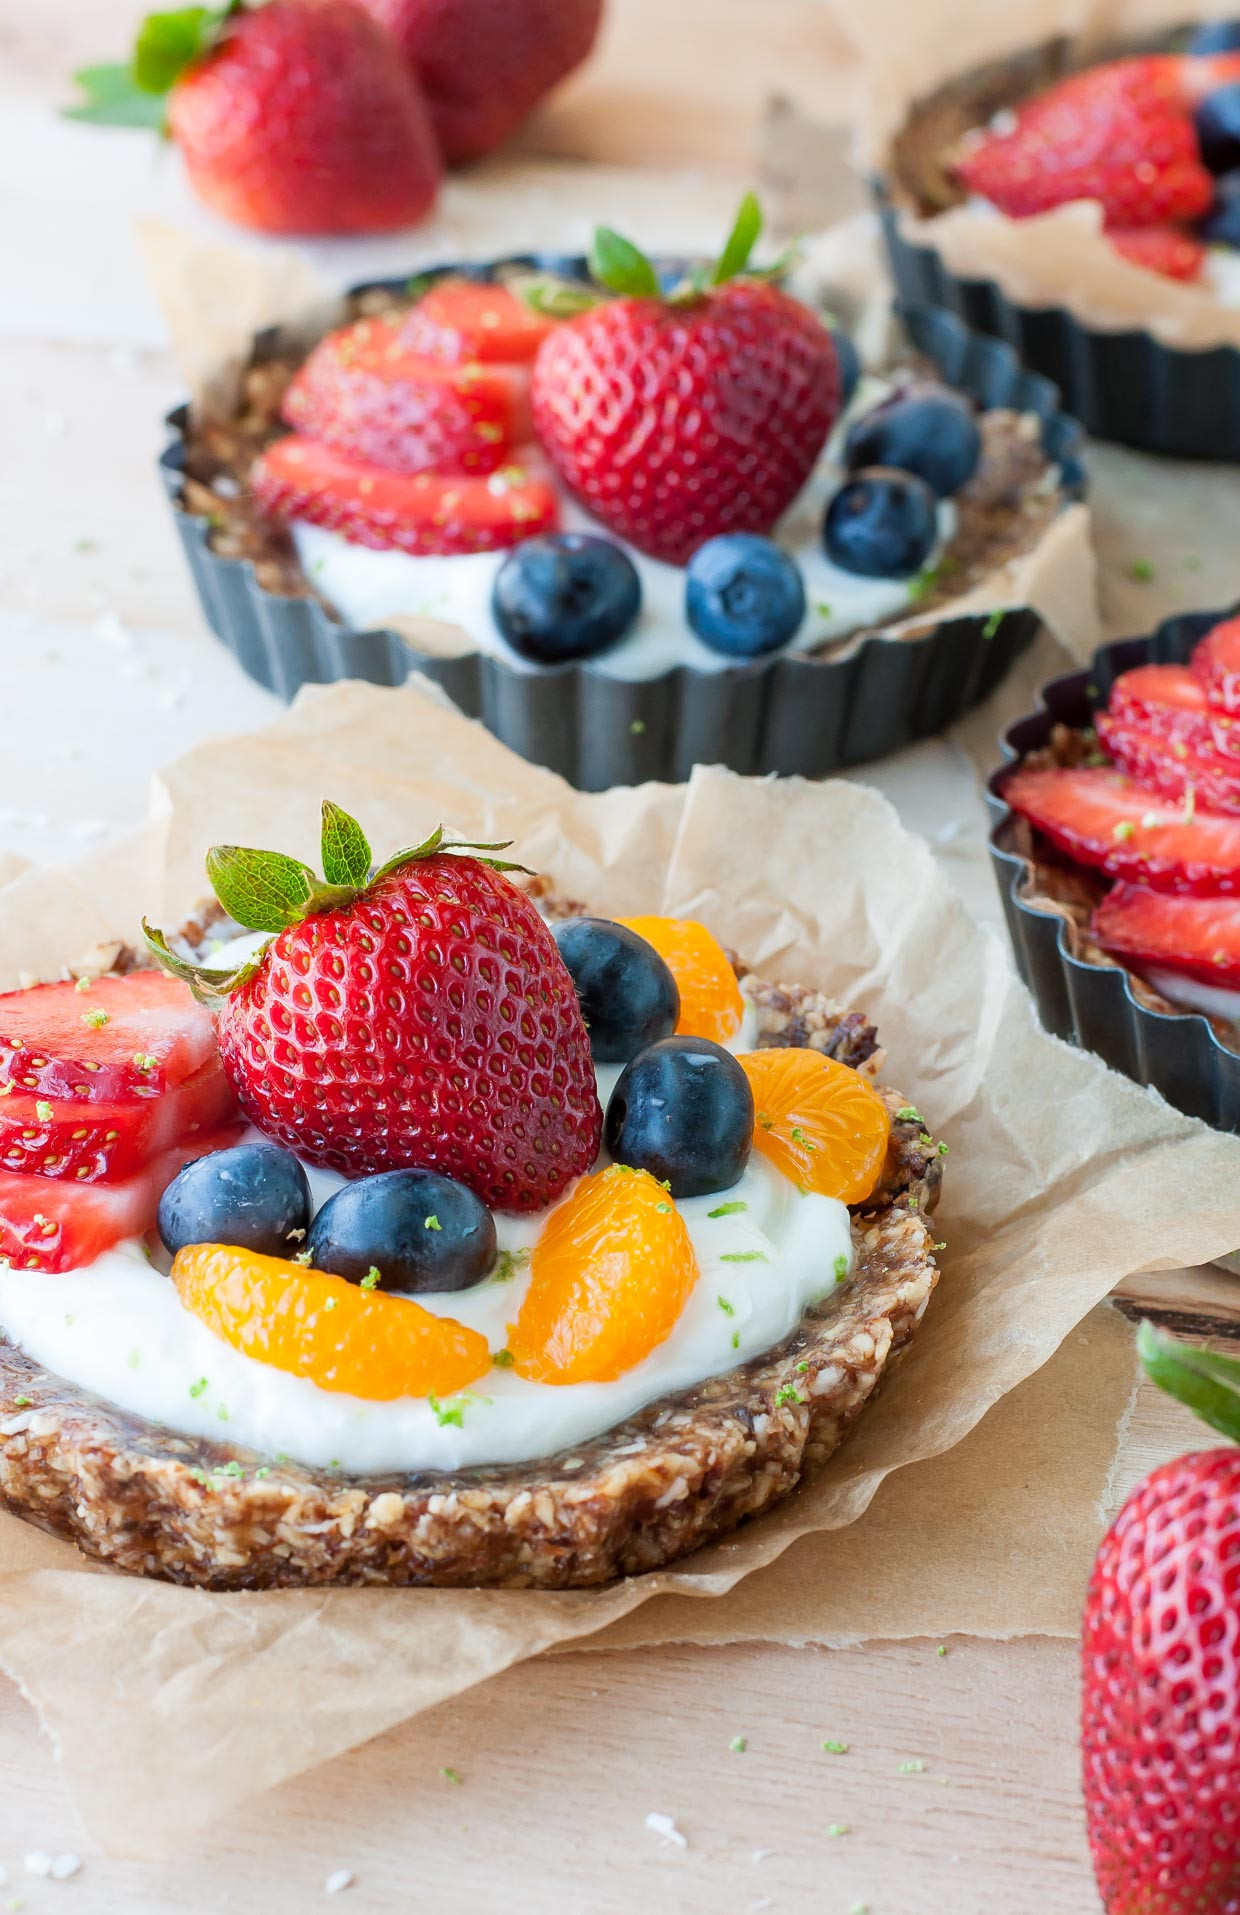 Healthy Fruit Desserts
 Healthy No Bake Coconut Lime Tarts with Fruit and Yogurt